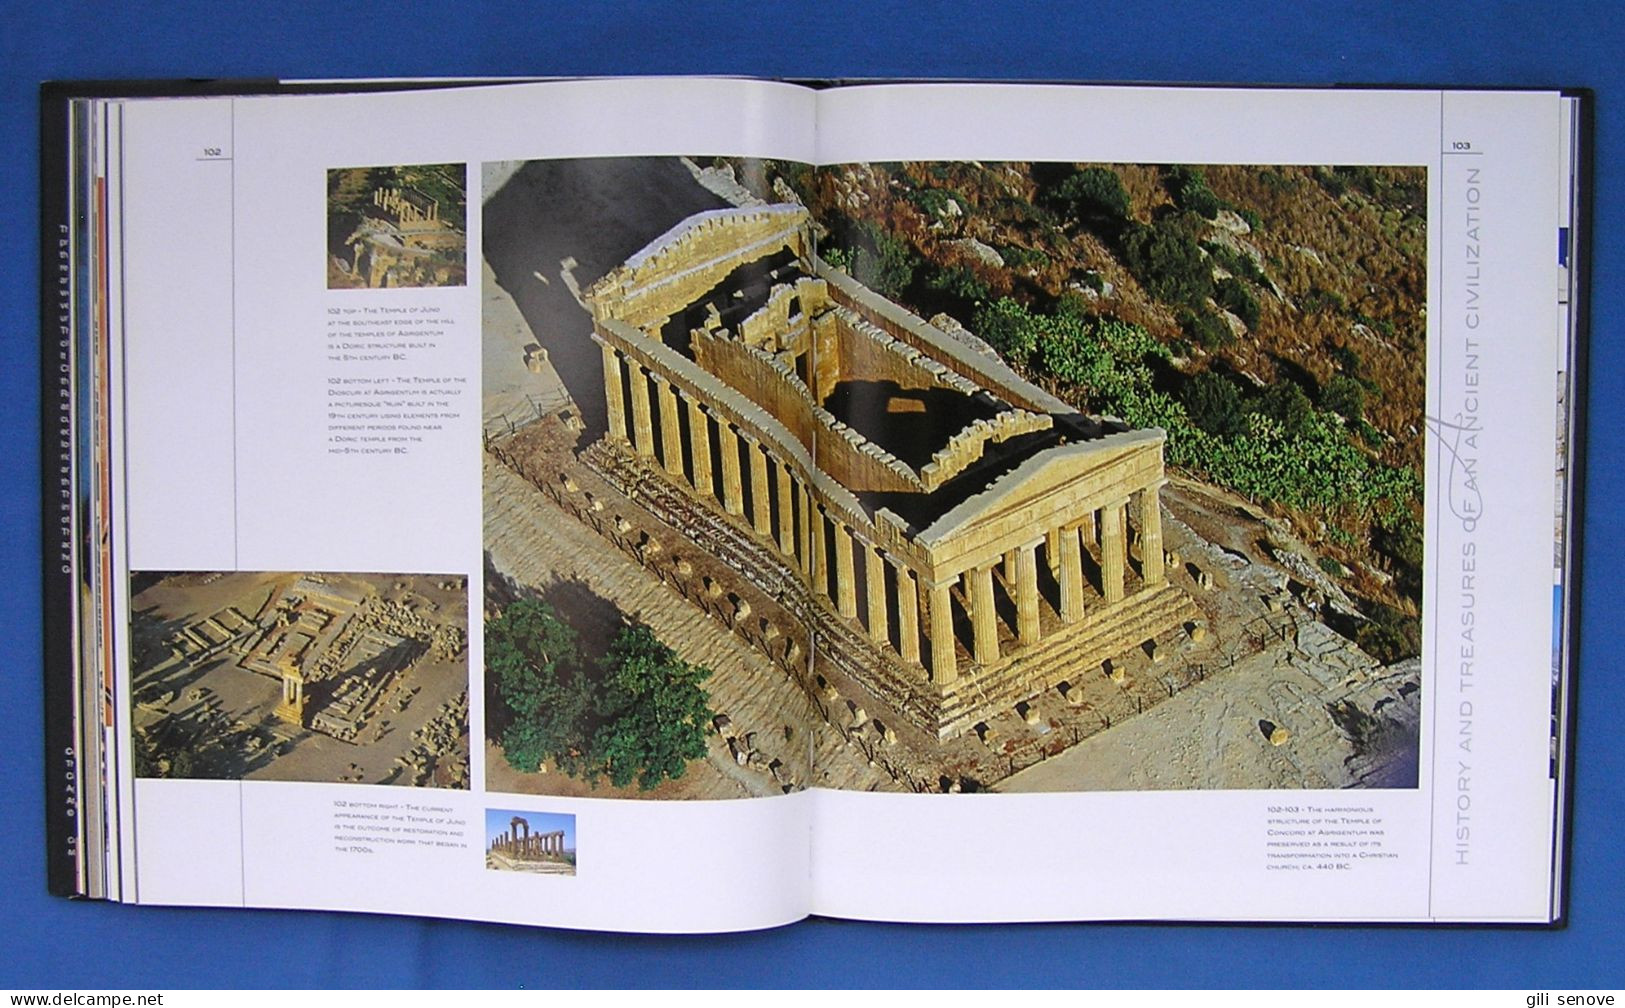 Greece: History and Treasures of an Ancient Civilization 2007